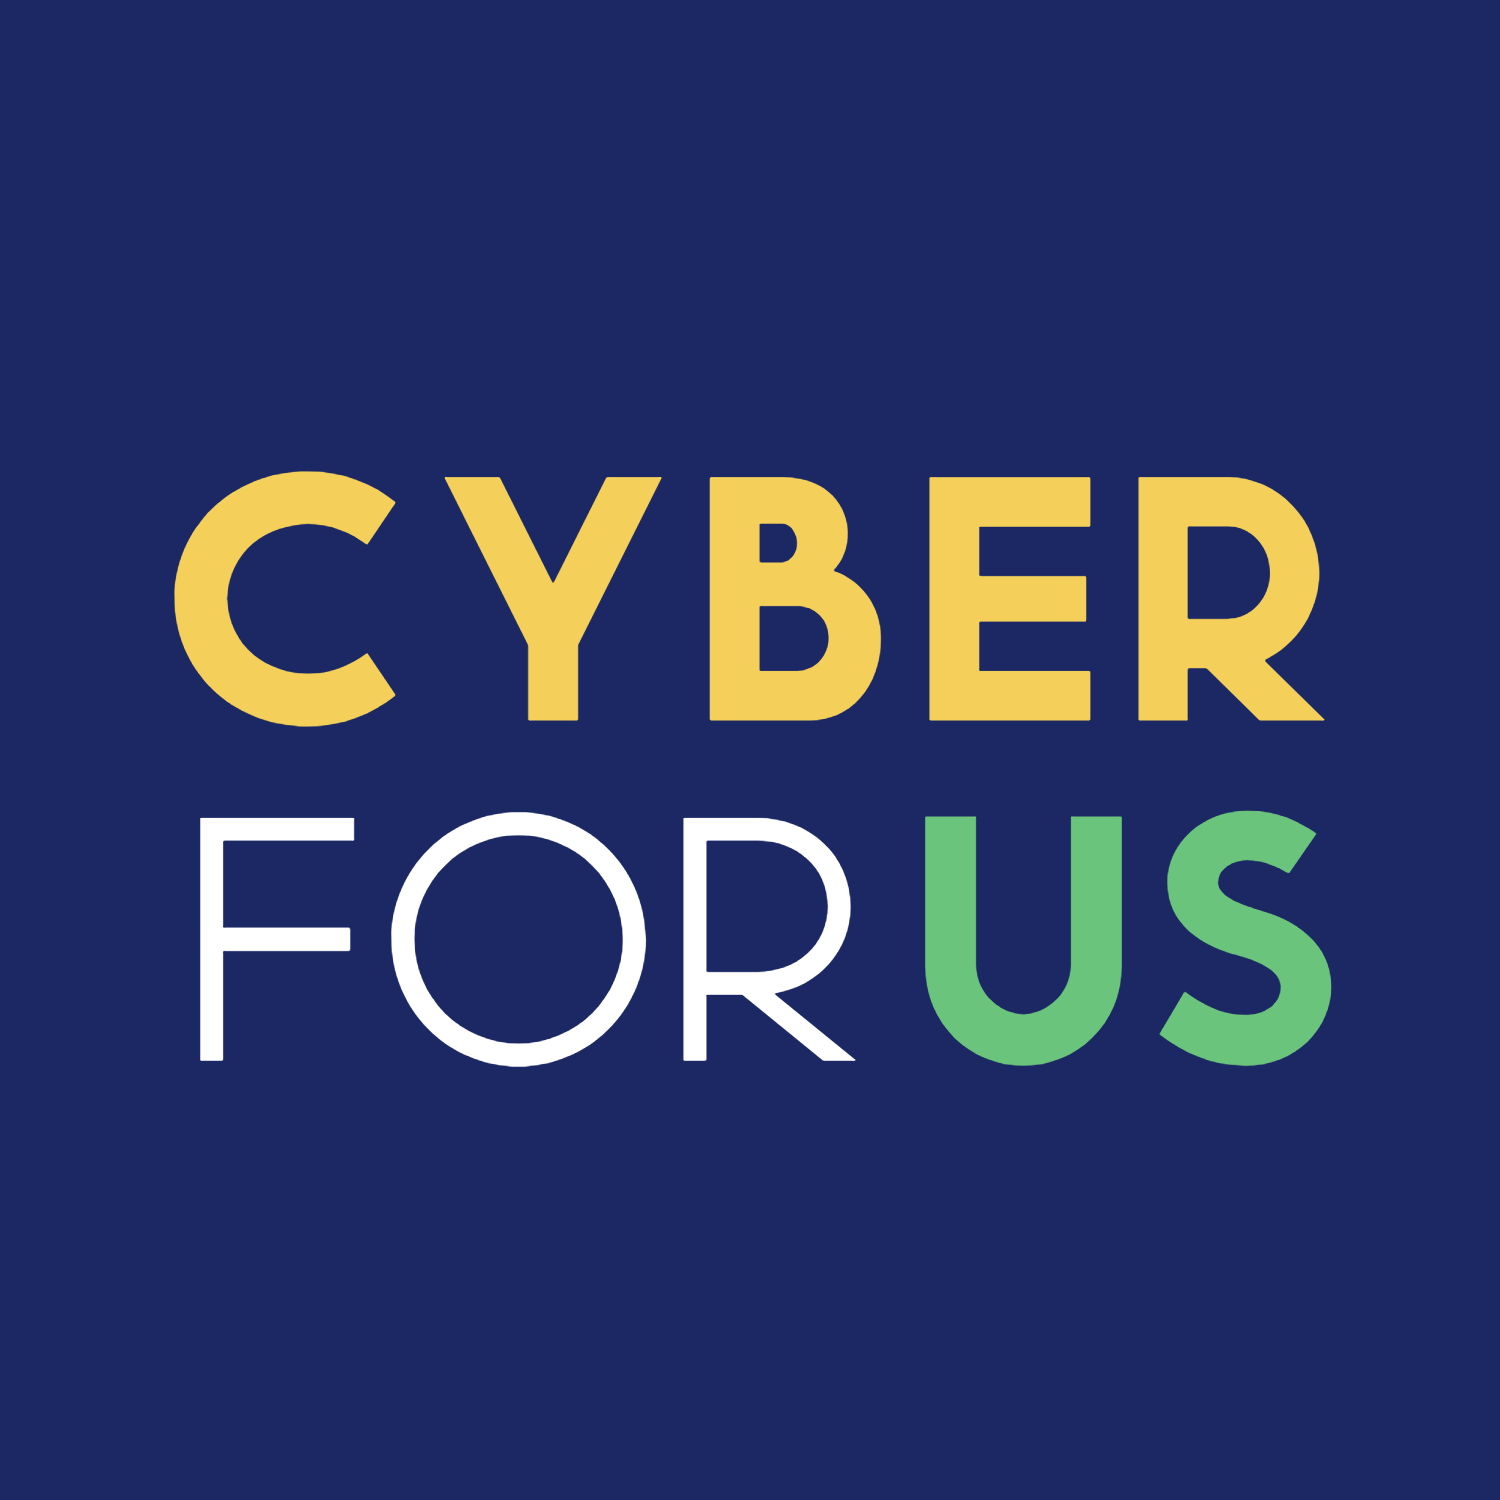 Cyber For Us